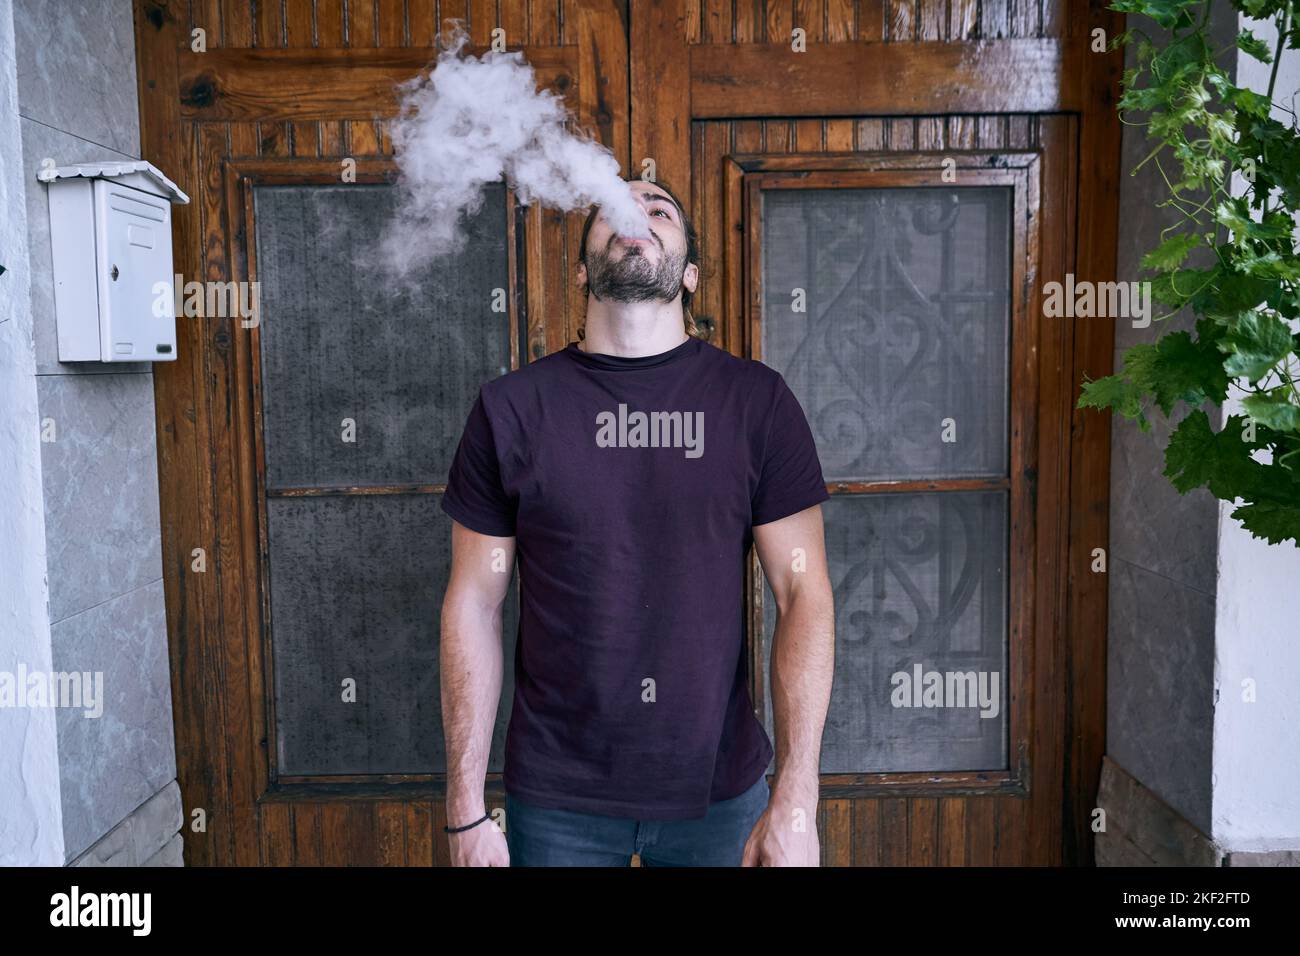 caucasian young man with beard exhaling water vapor through his mouth near wooden door and mailbox Stock Photo